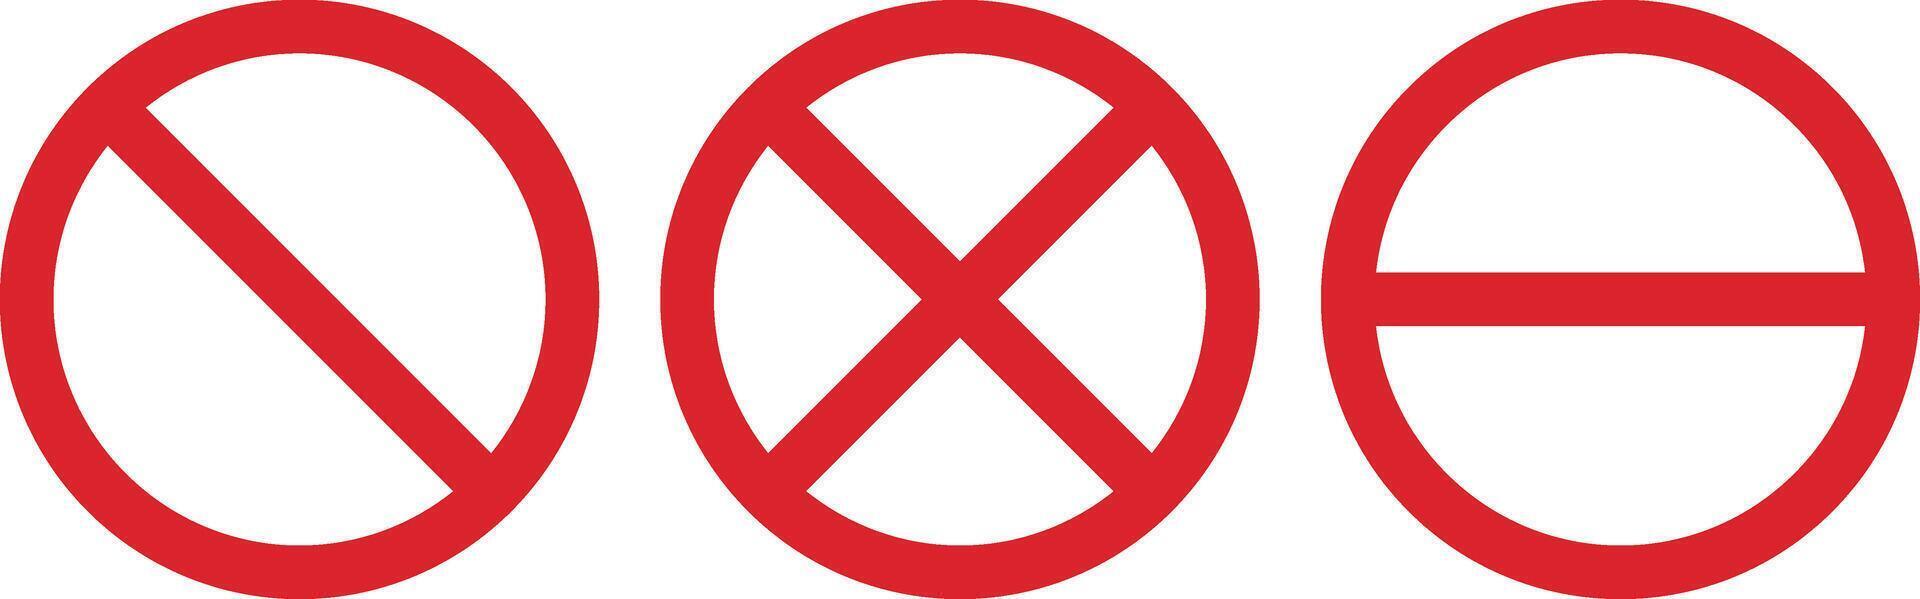 Set of close icon vector sign. Stop road prohibition sign isolated on white.